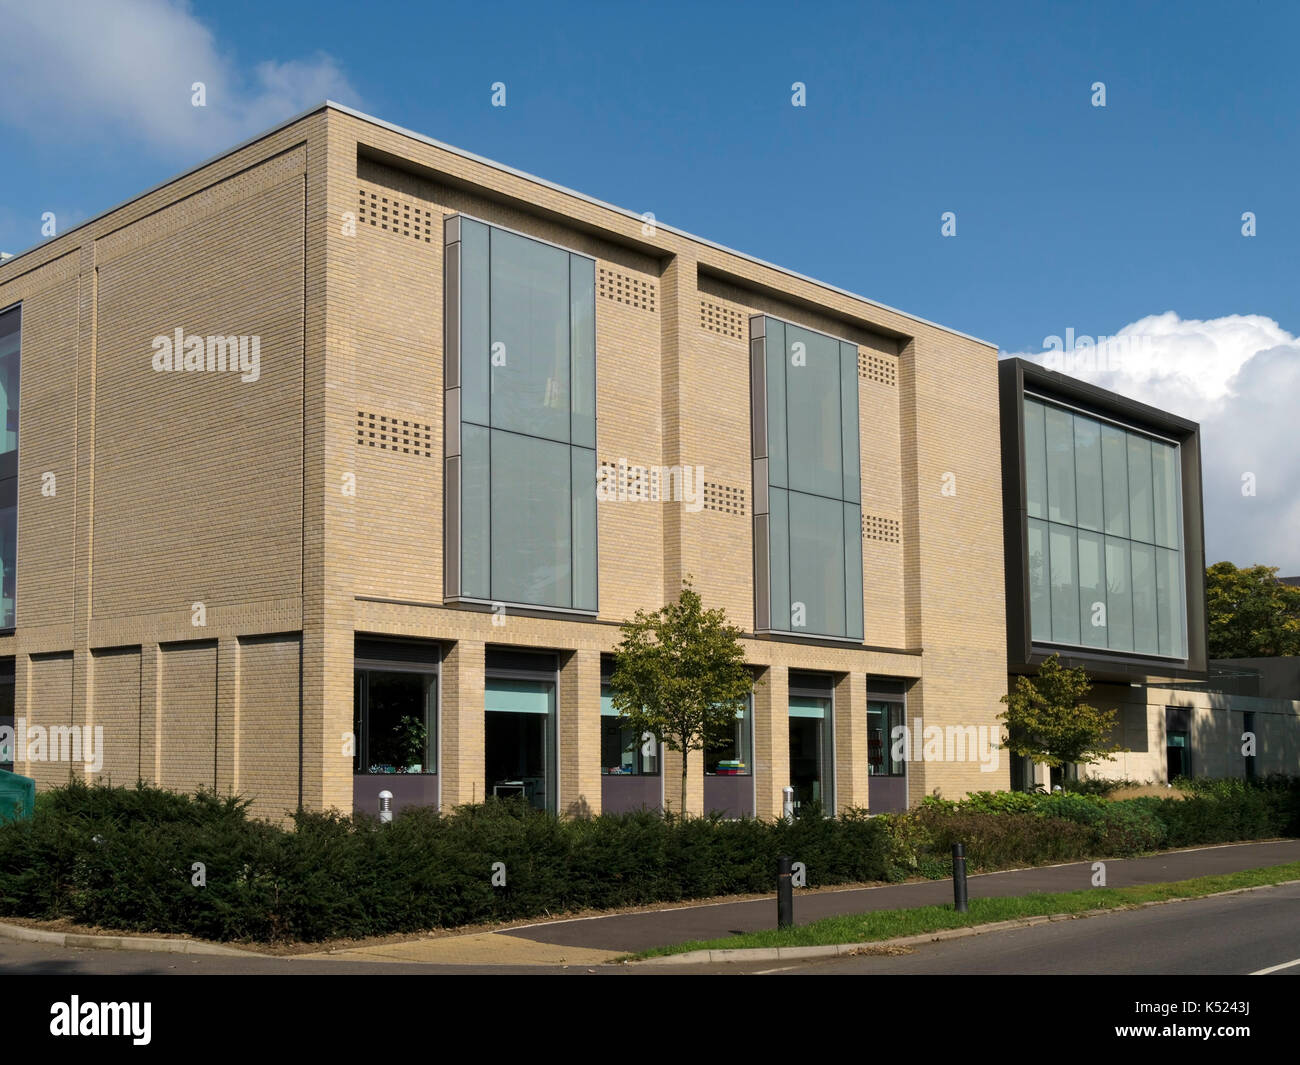 New Science Centre building, Uppingham Boarding School by prime contractor Bowmer and Kirkland, Uppingham, Rutland, England, UK Stock Photo